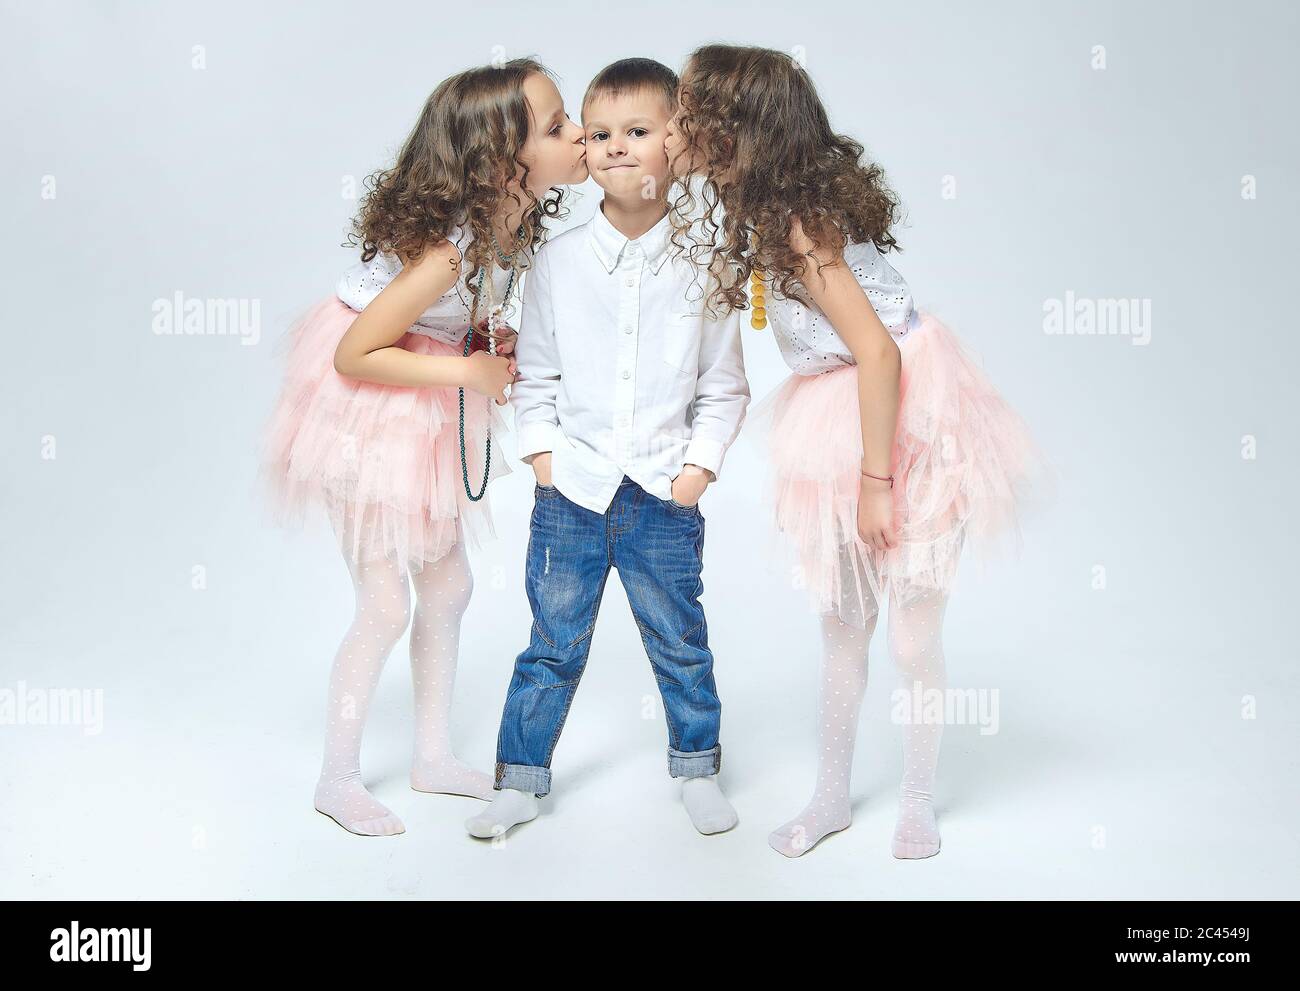 two little girls kiss a boy. beautiful photo session in the Studio, White back Stock Photo